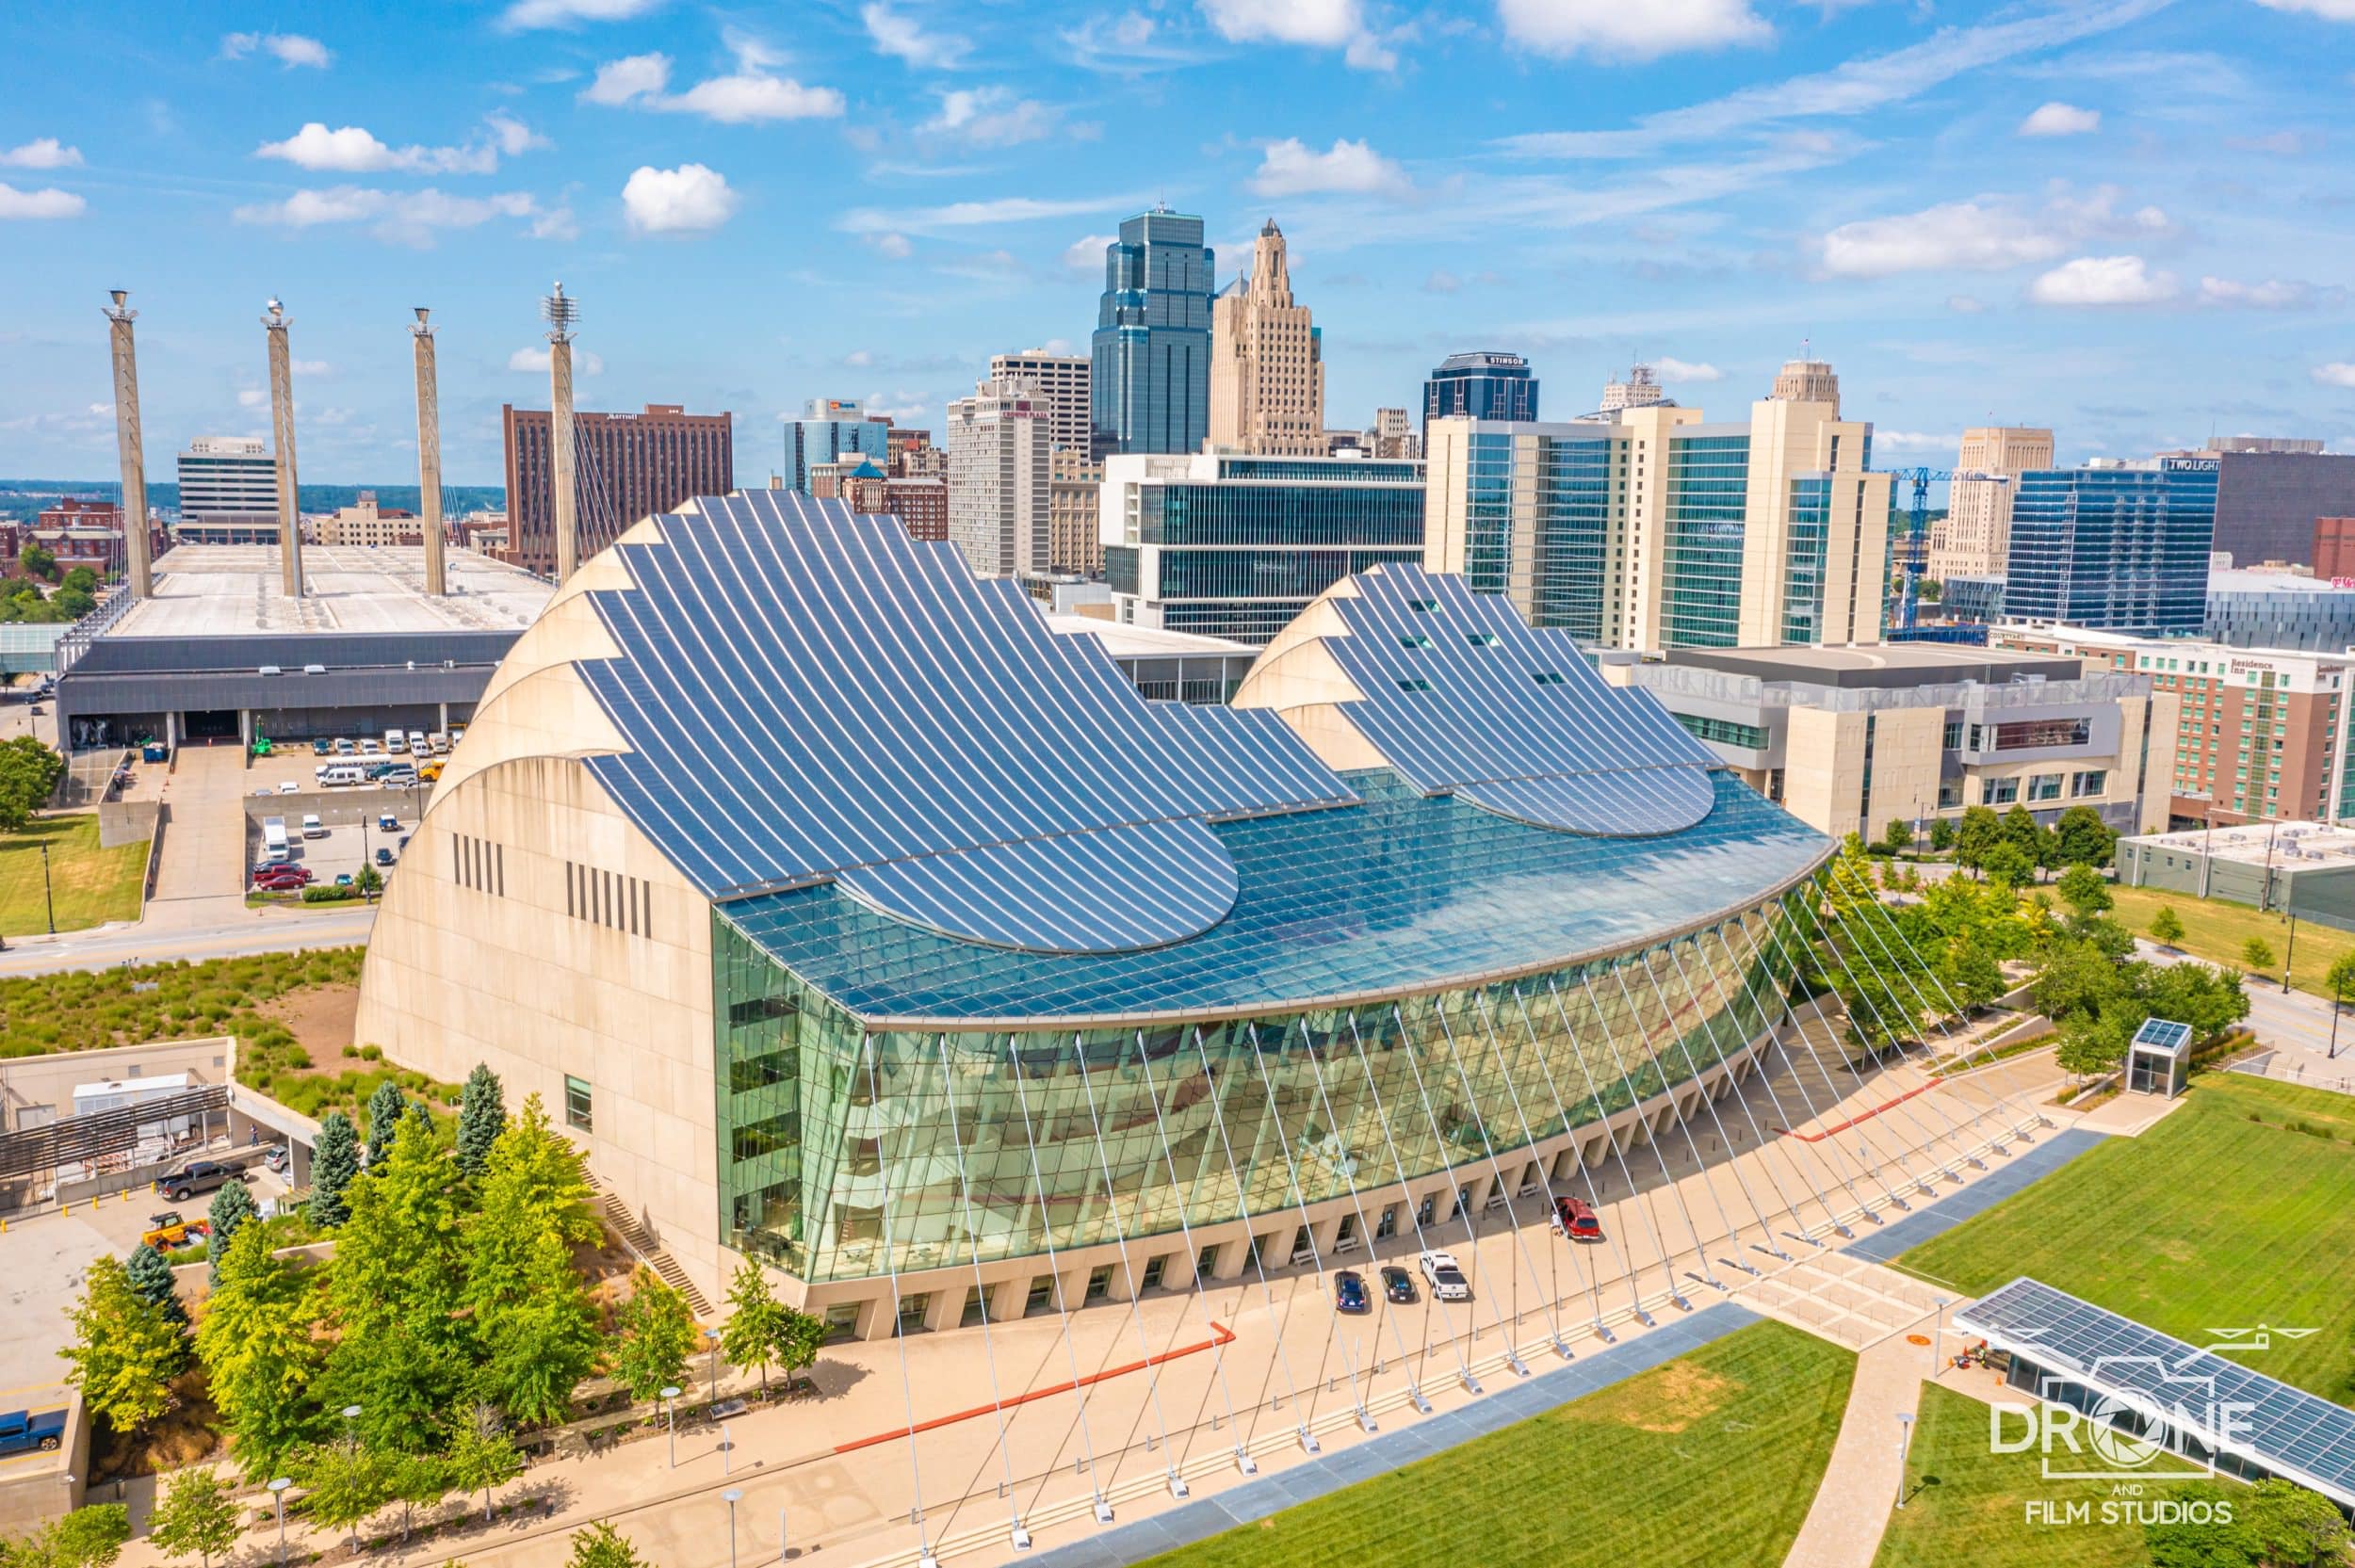 KAUFFMAN CENTER FOR THE PERFORMING ARTS CLAD IN GB-60 STAINLESS STEEL.